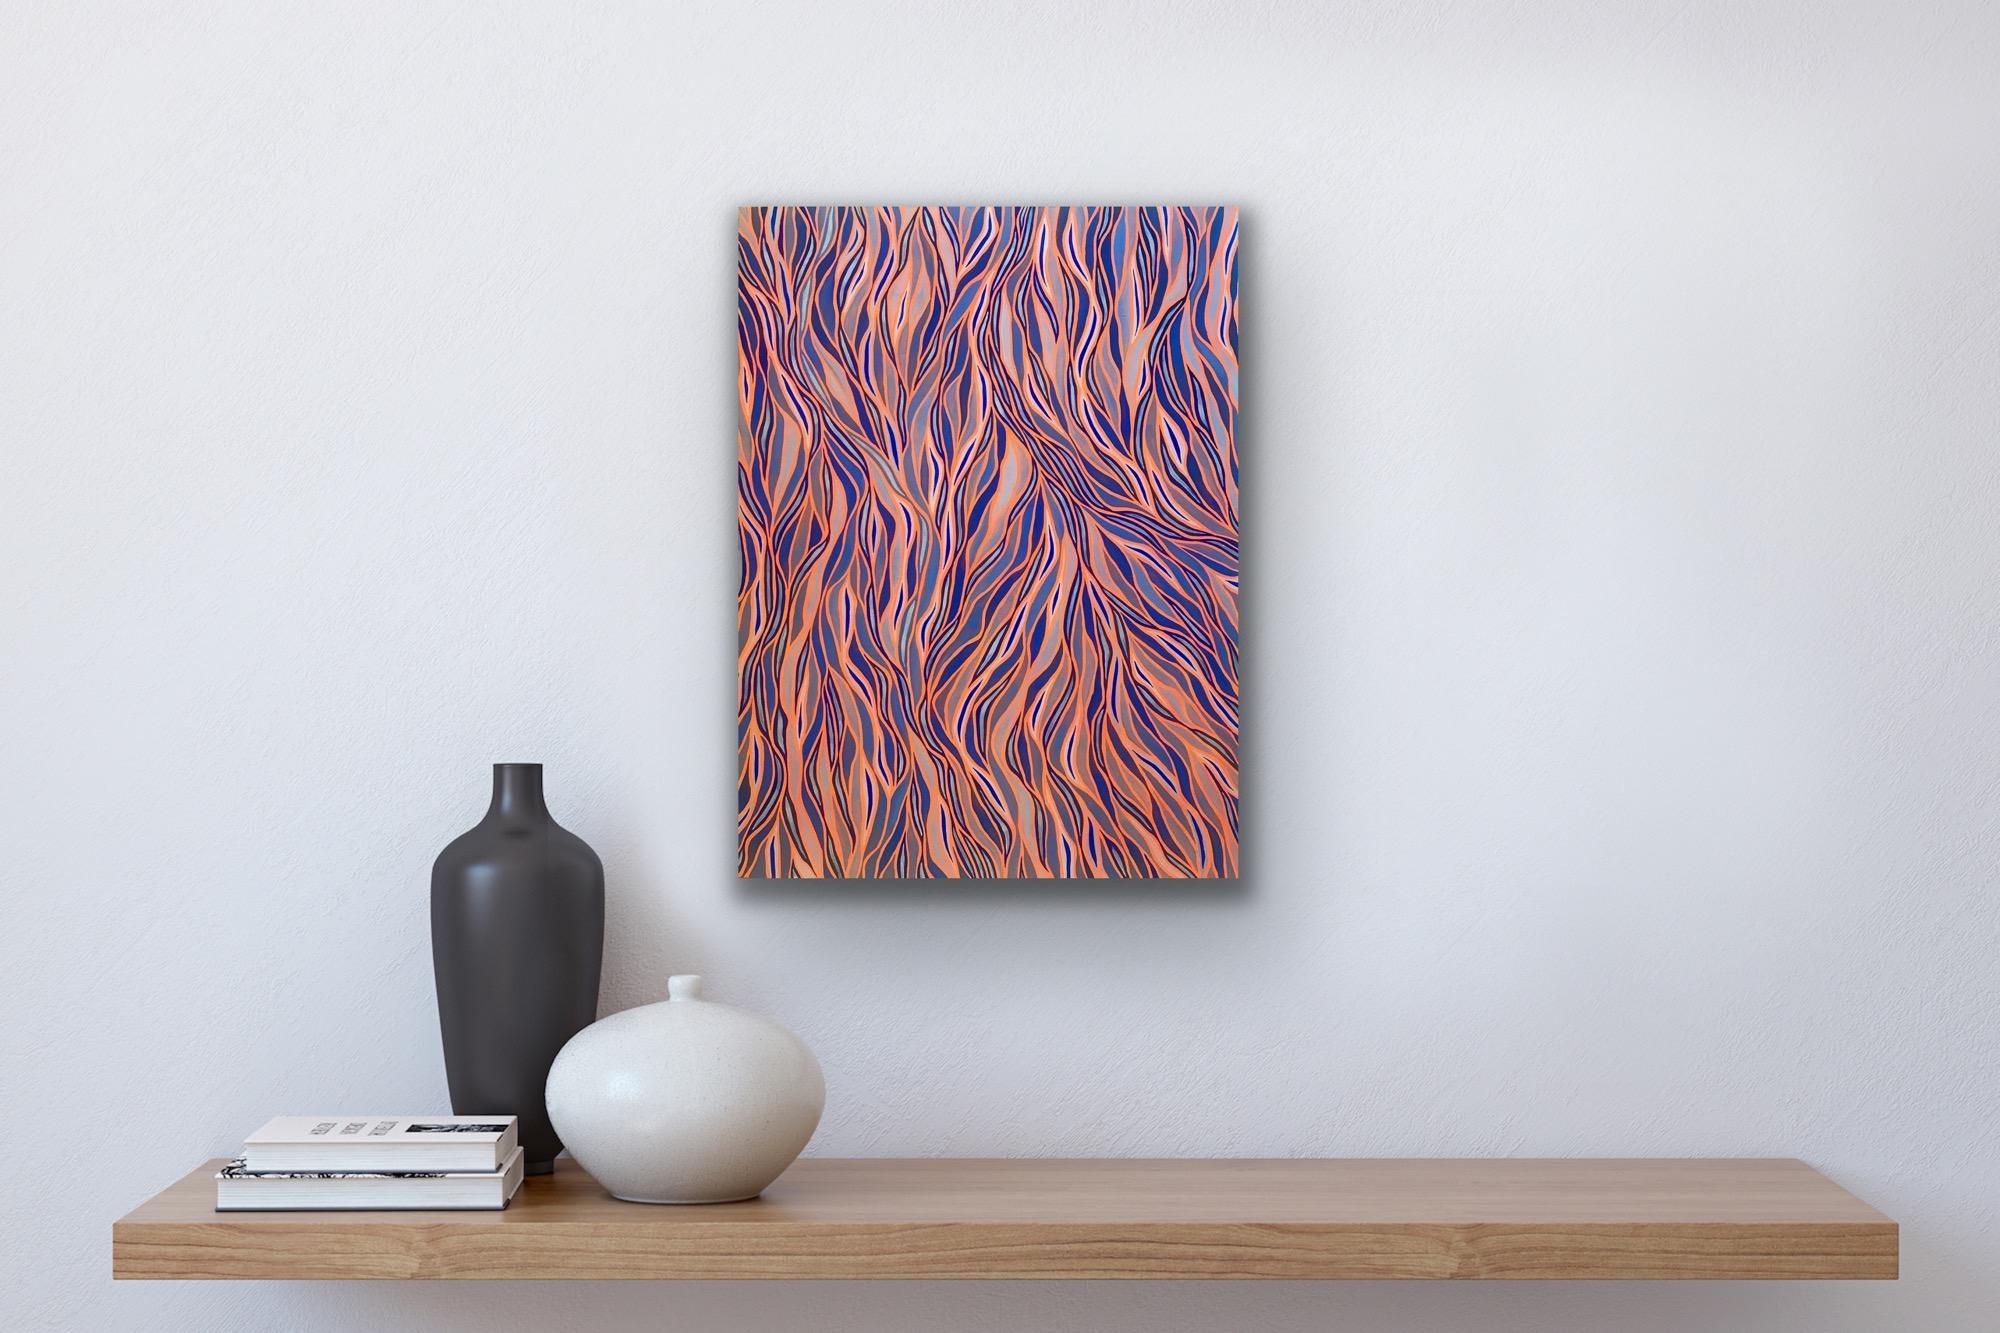 Wavy patterned abstraction in complimentary orange and blue - 070621 - Painting by Patricia Fabricant